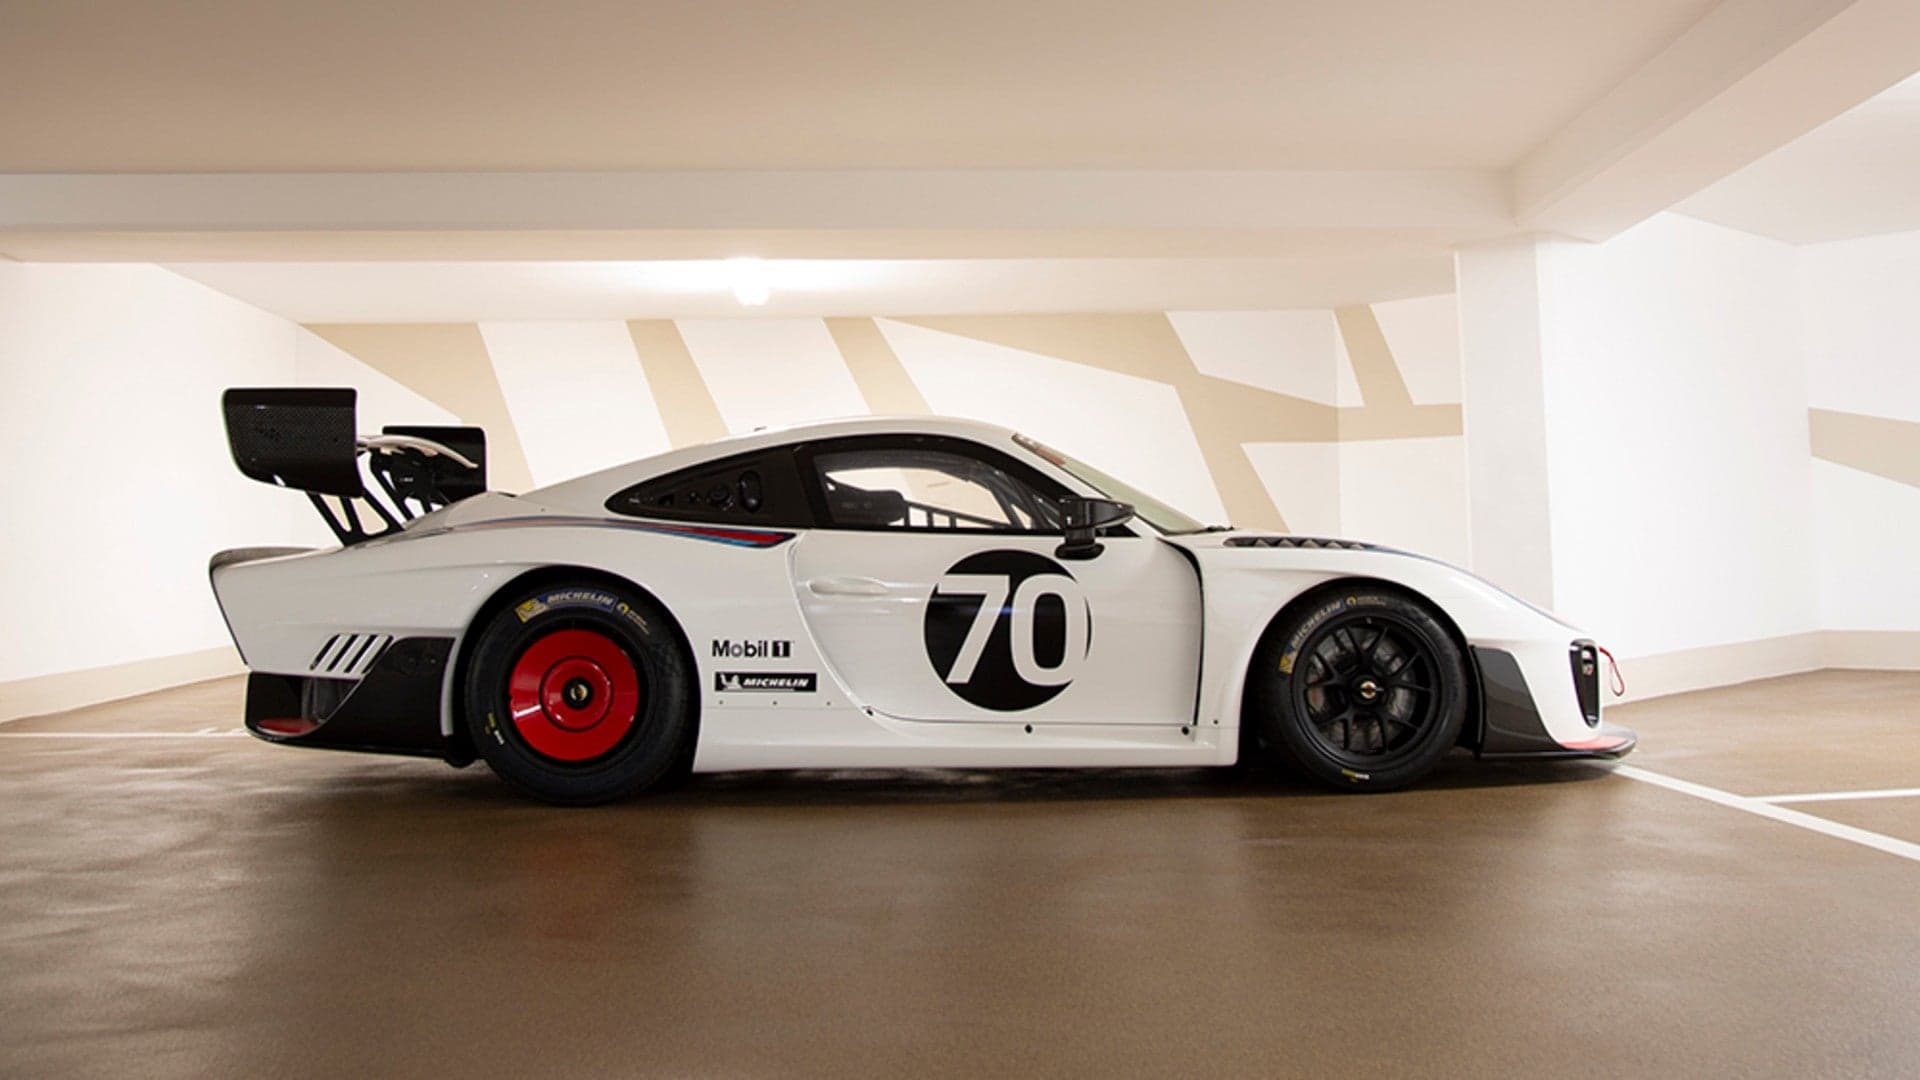 Sad: This $1.5M, Track-Only Porsche 935 For Sale Was Robbed of Ever Being Driven